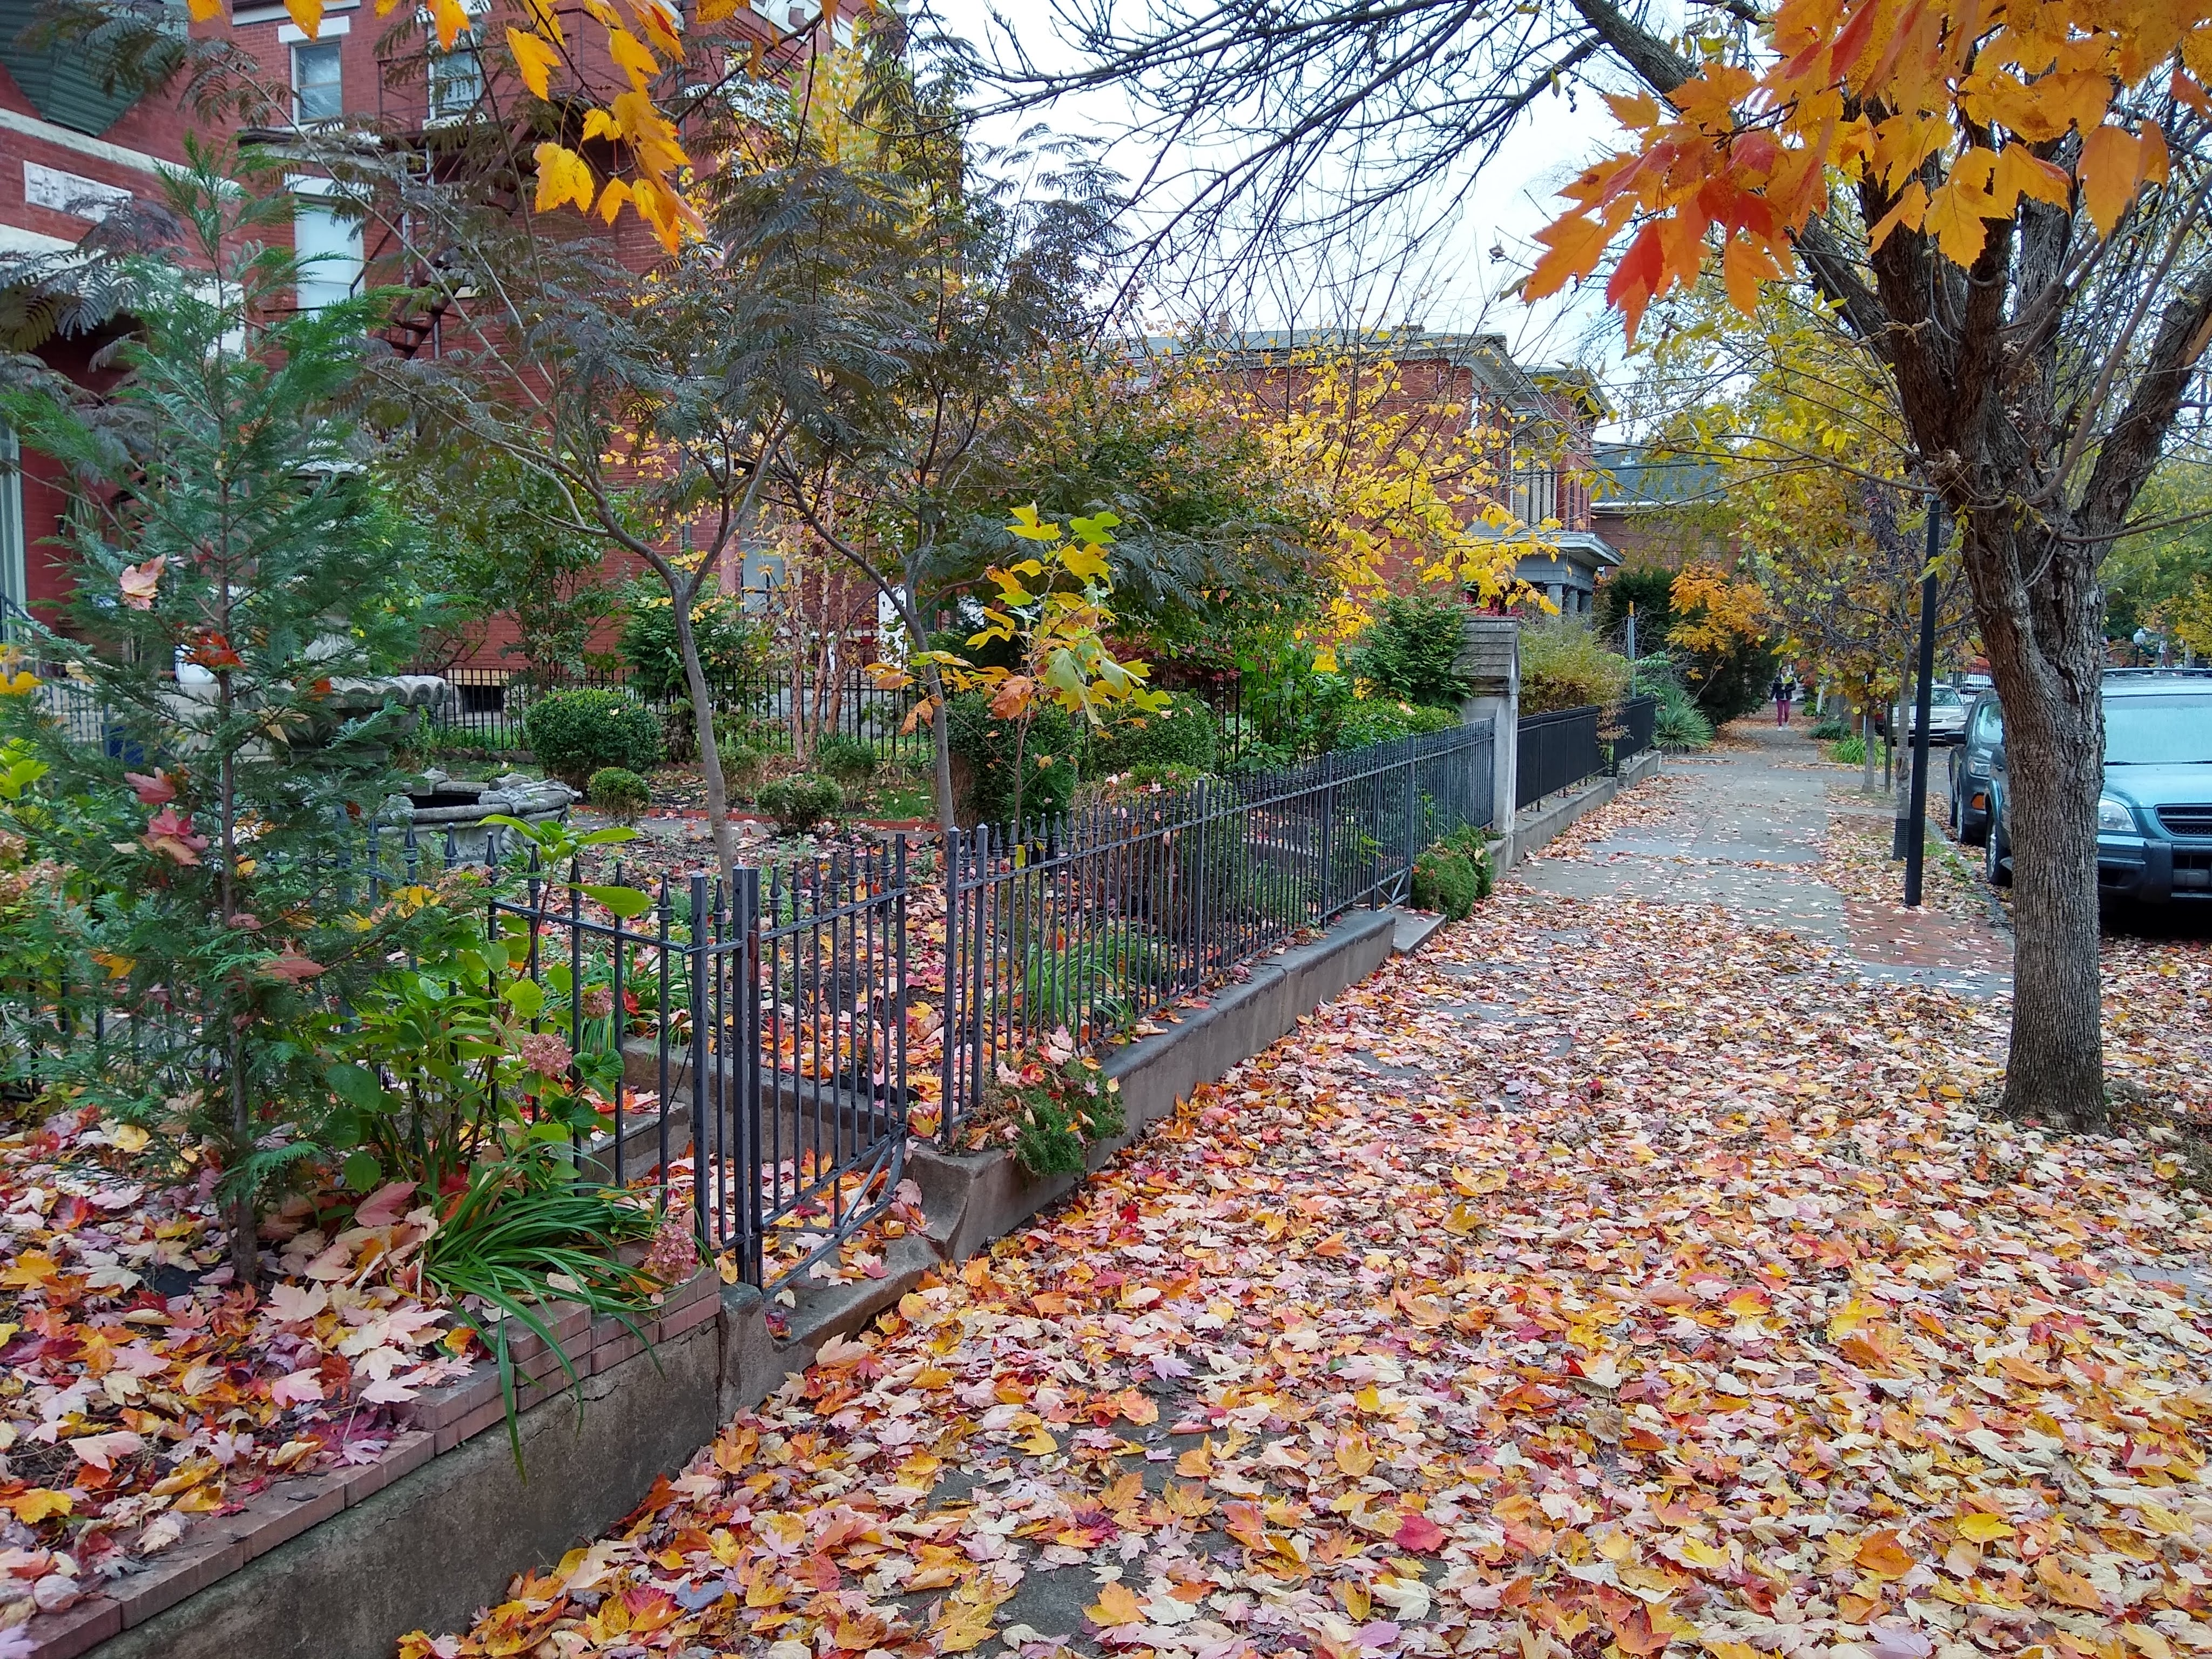 A street in Old Louisville, showing the sidewalk covered with leaves of many colors